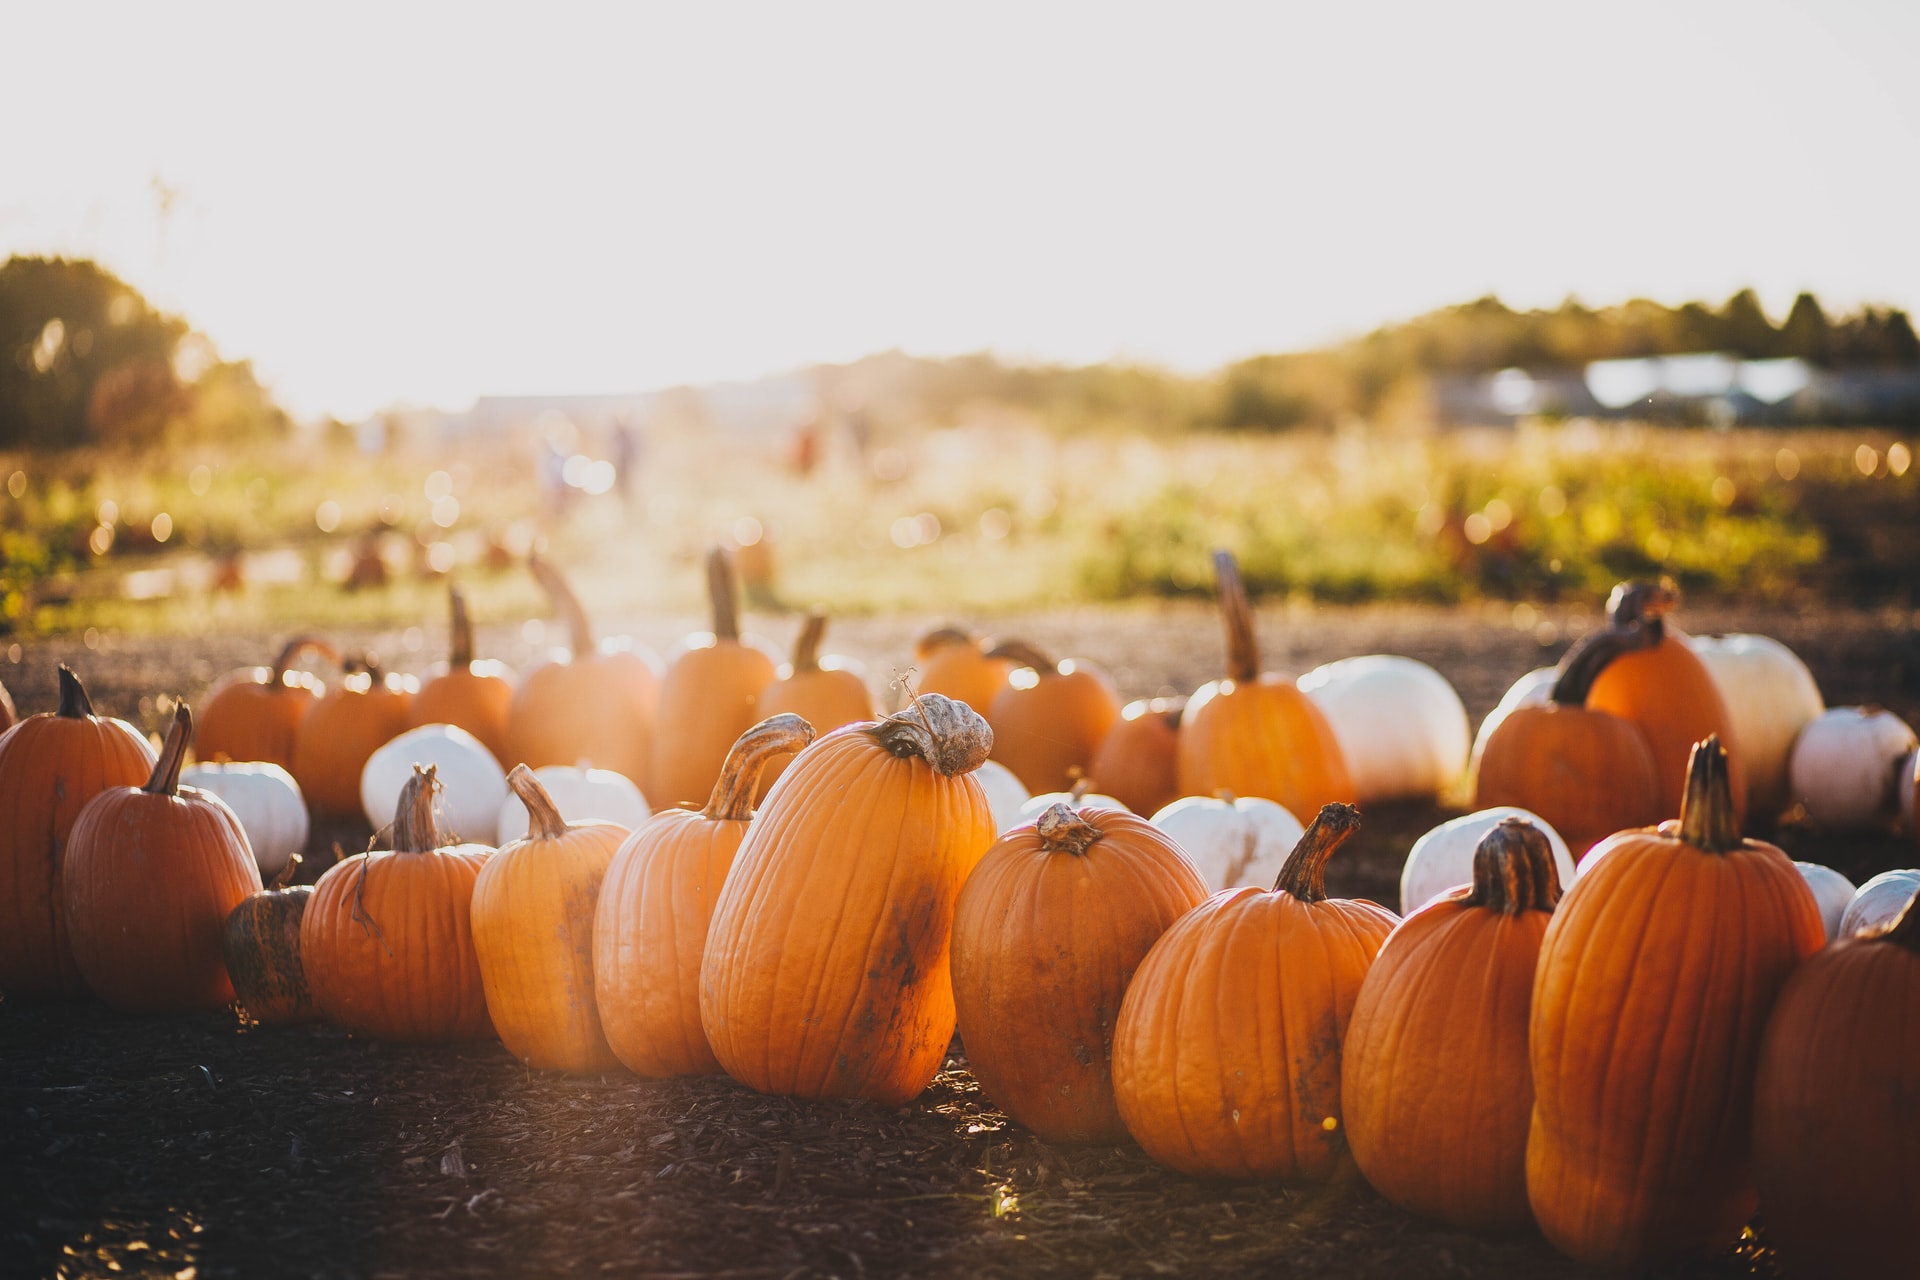 Knoxville Pumpkin Patches and Corn Mazes